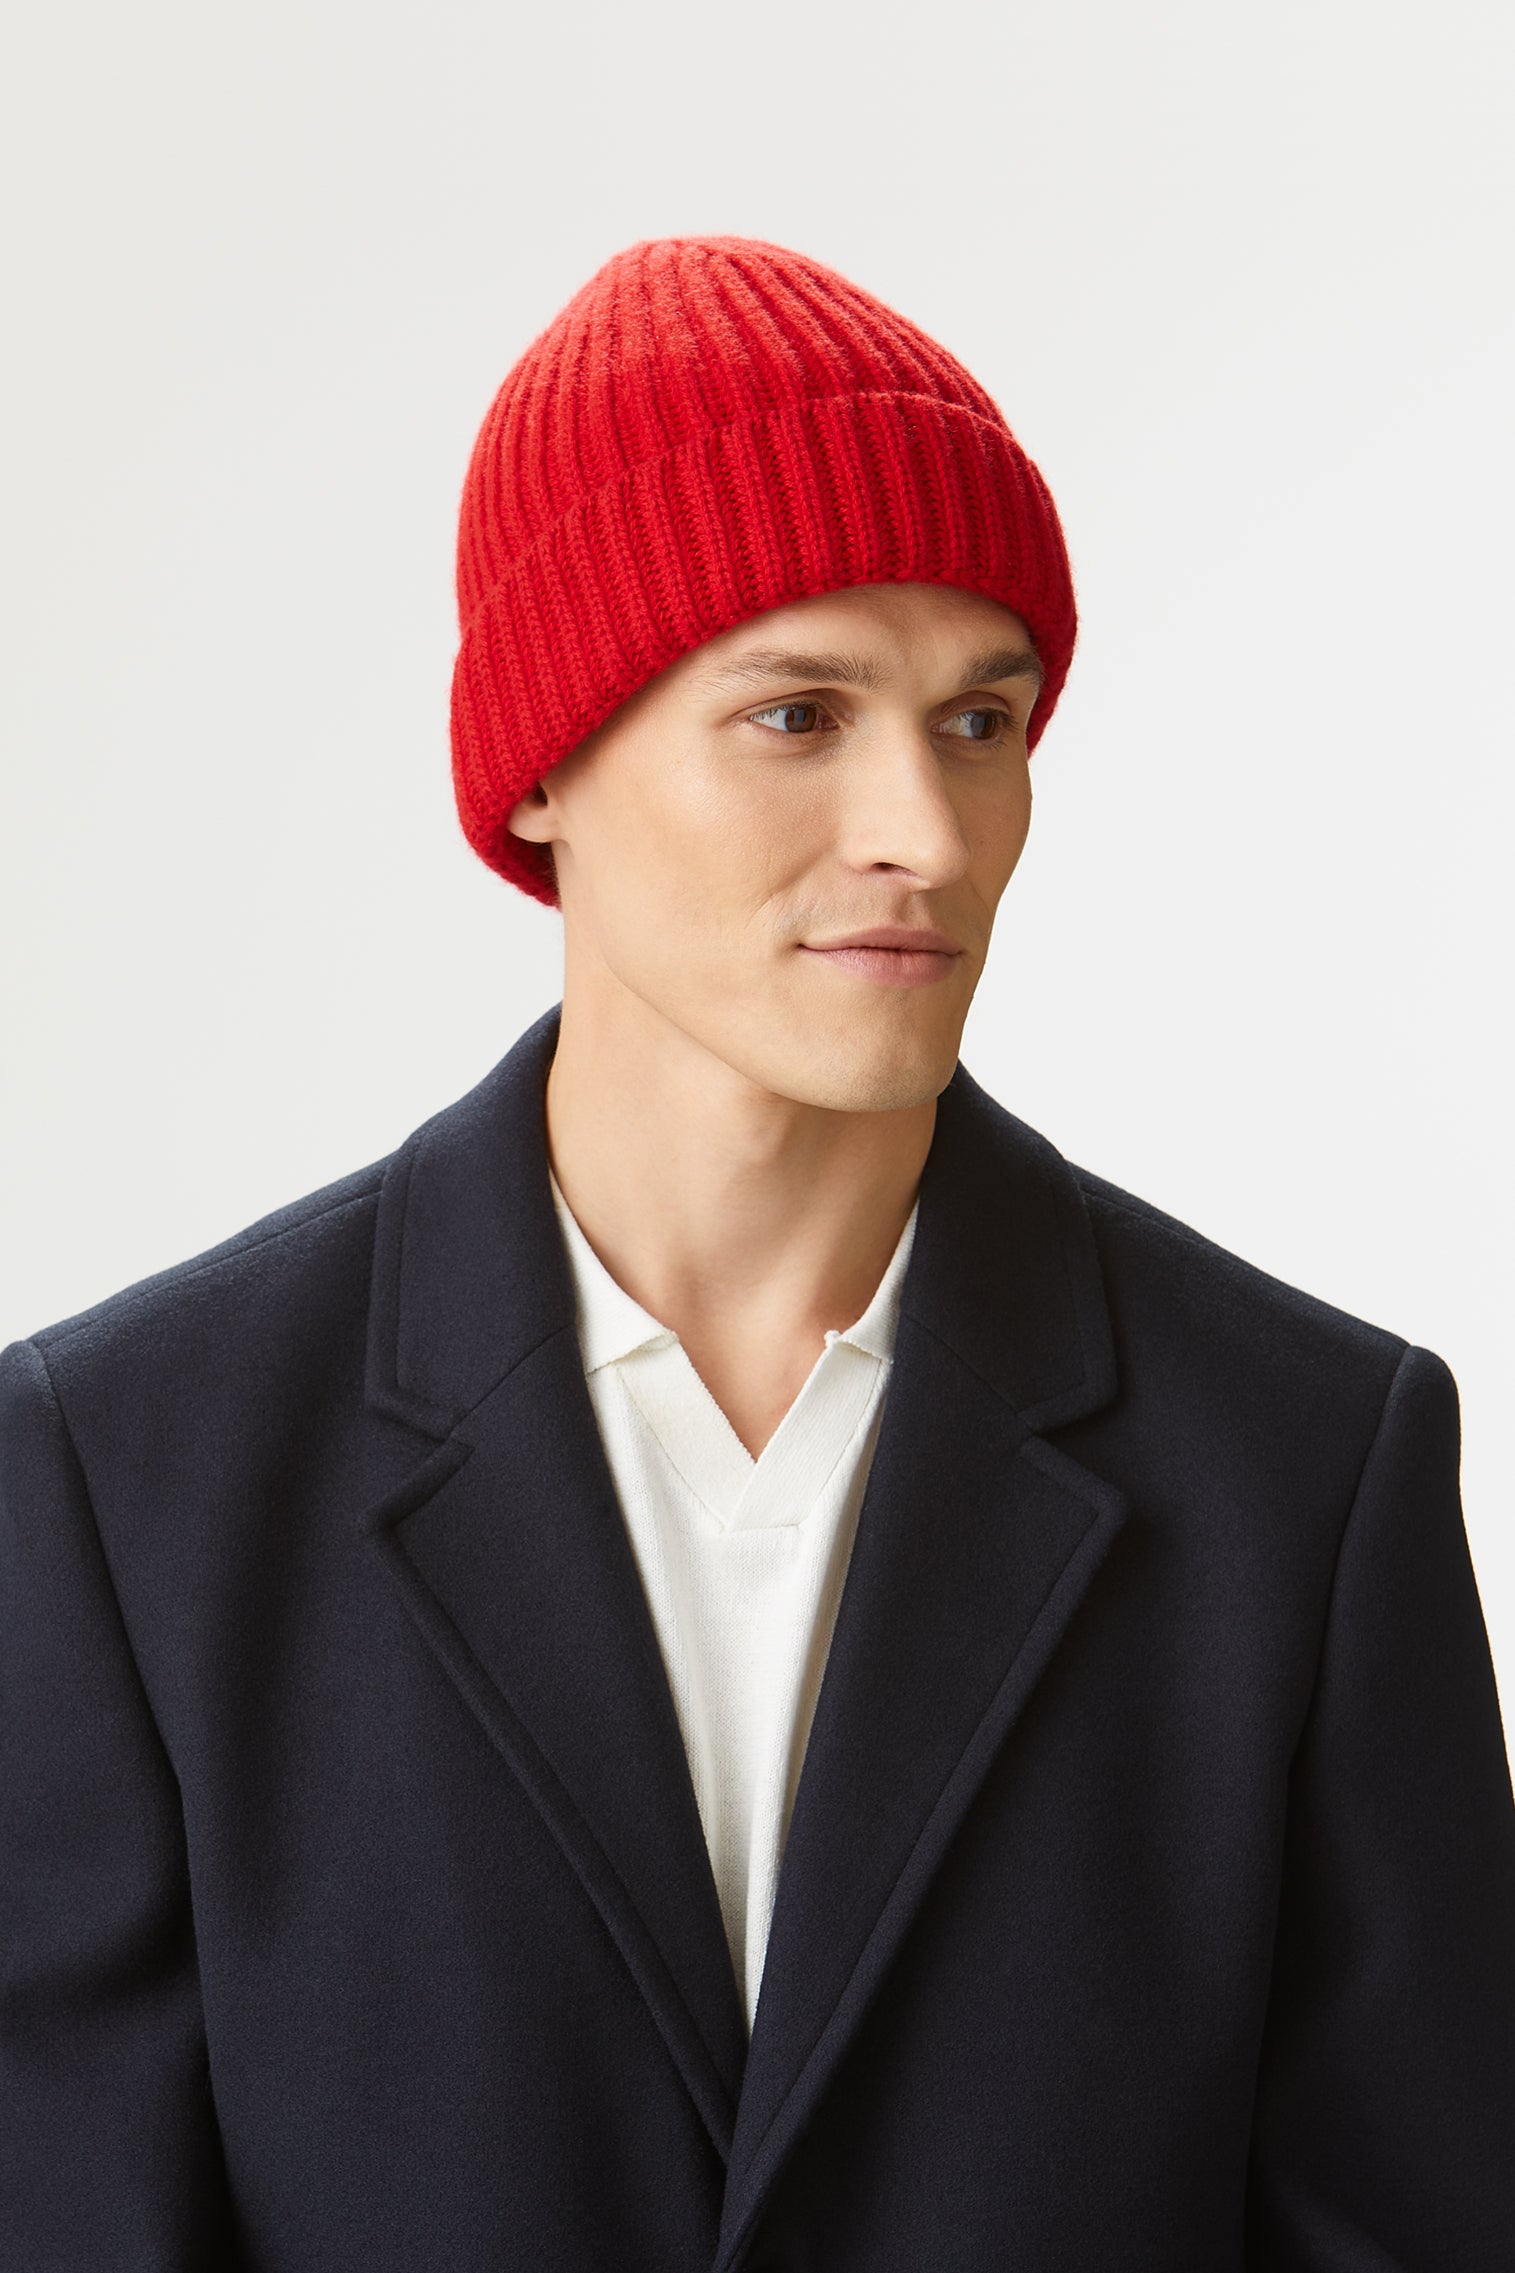 Rannoch Red Cashmere Beanie - Beanies - Lock & Co. Hatters London UK